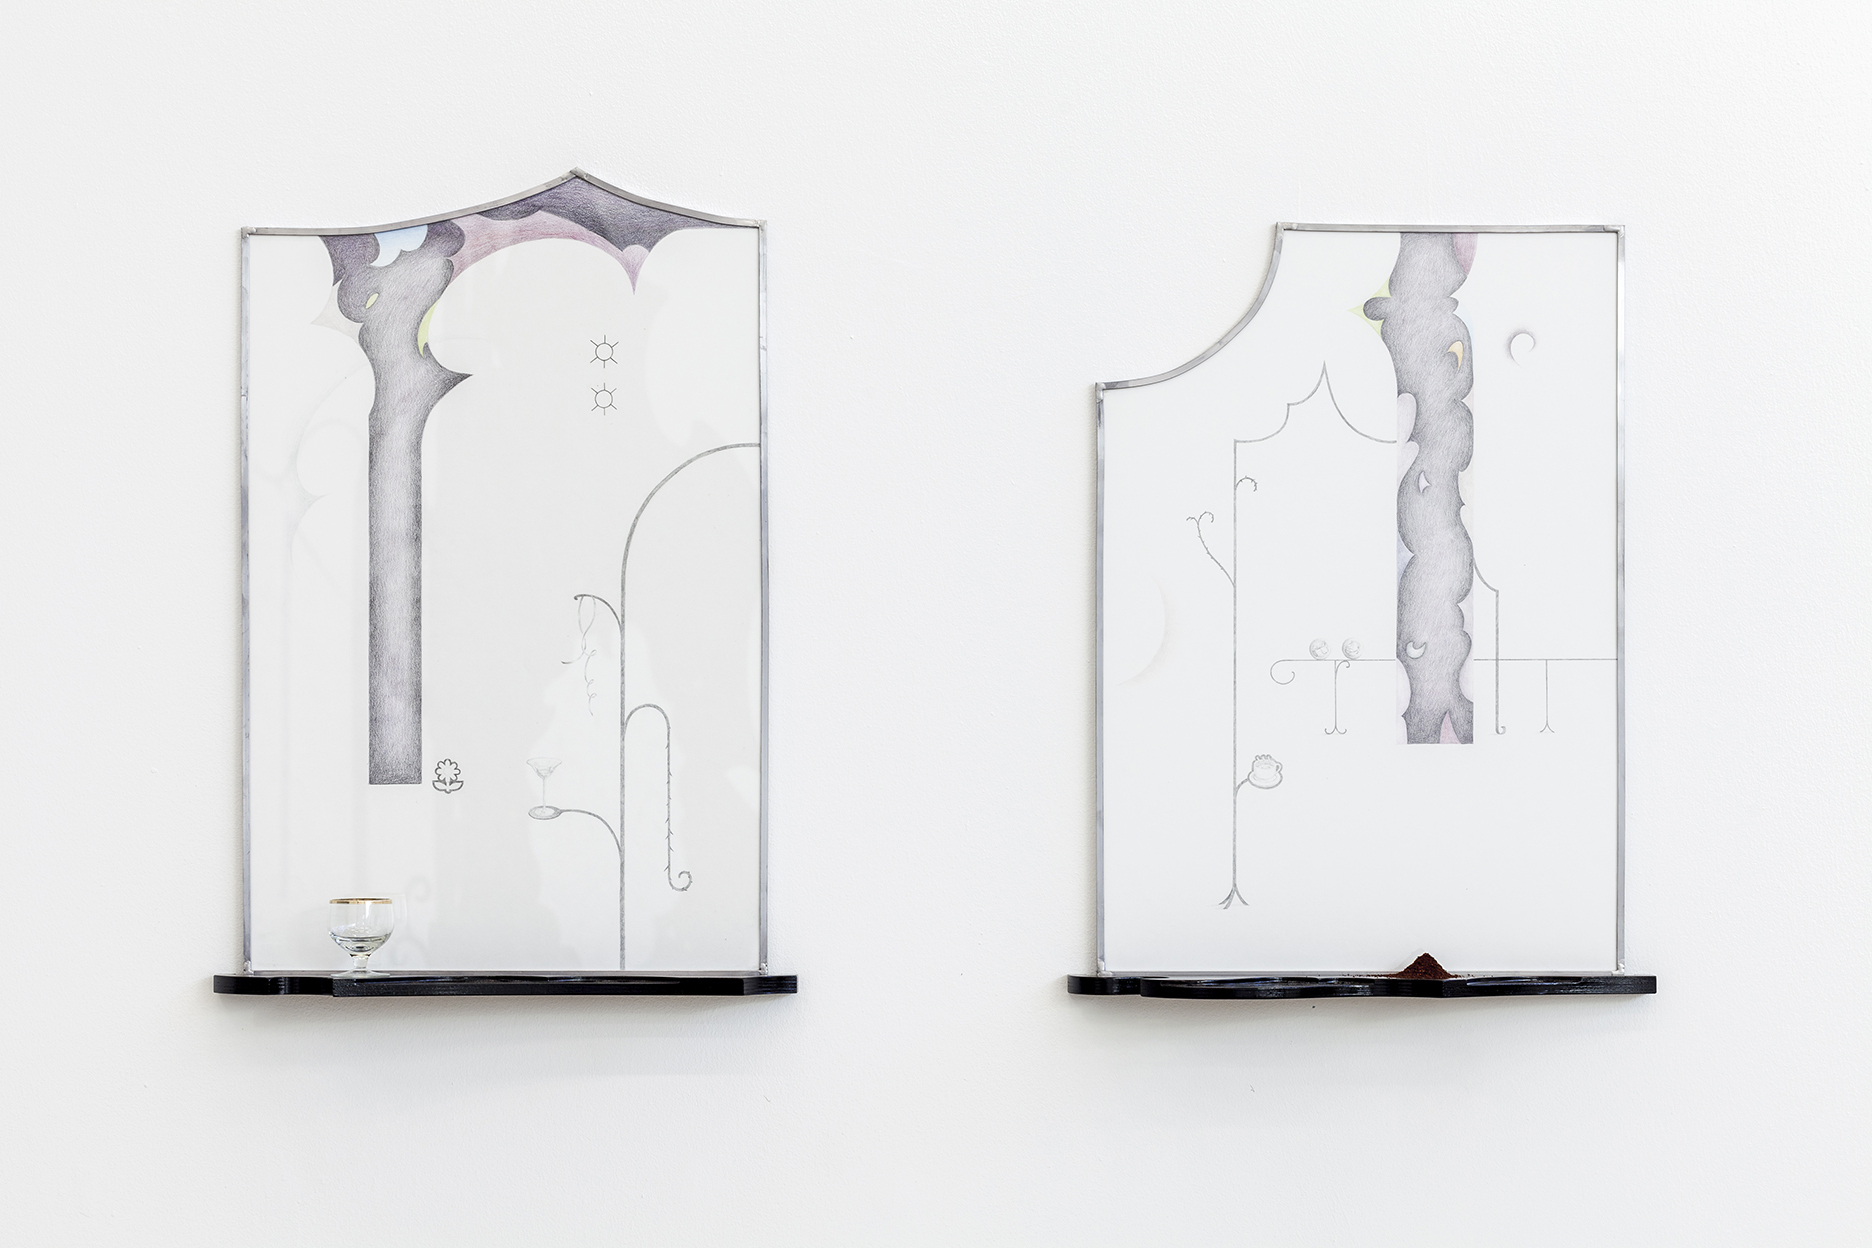 Anna Mari Liivrand. Prick of a Daisy. Evening Curves I &amp; II. Graphite and colored pencil on paper, plywood, black paint, glass, tin. Photo by Roman-Sten Tõnissoo